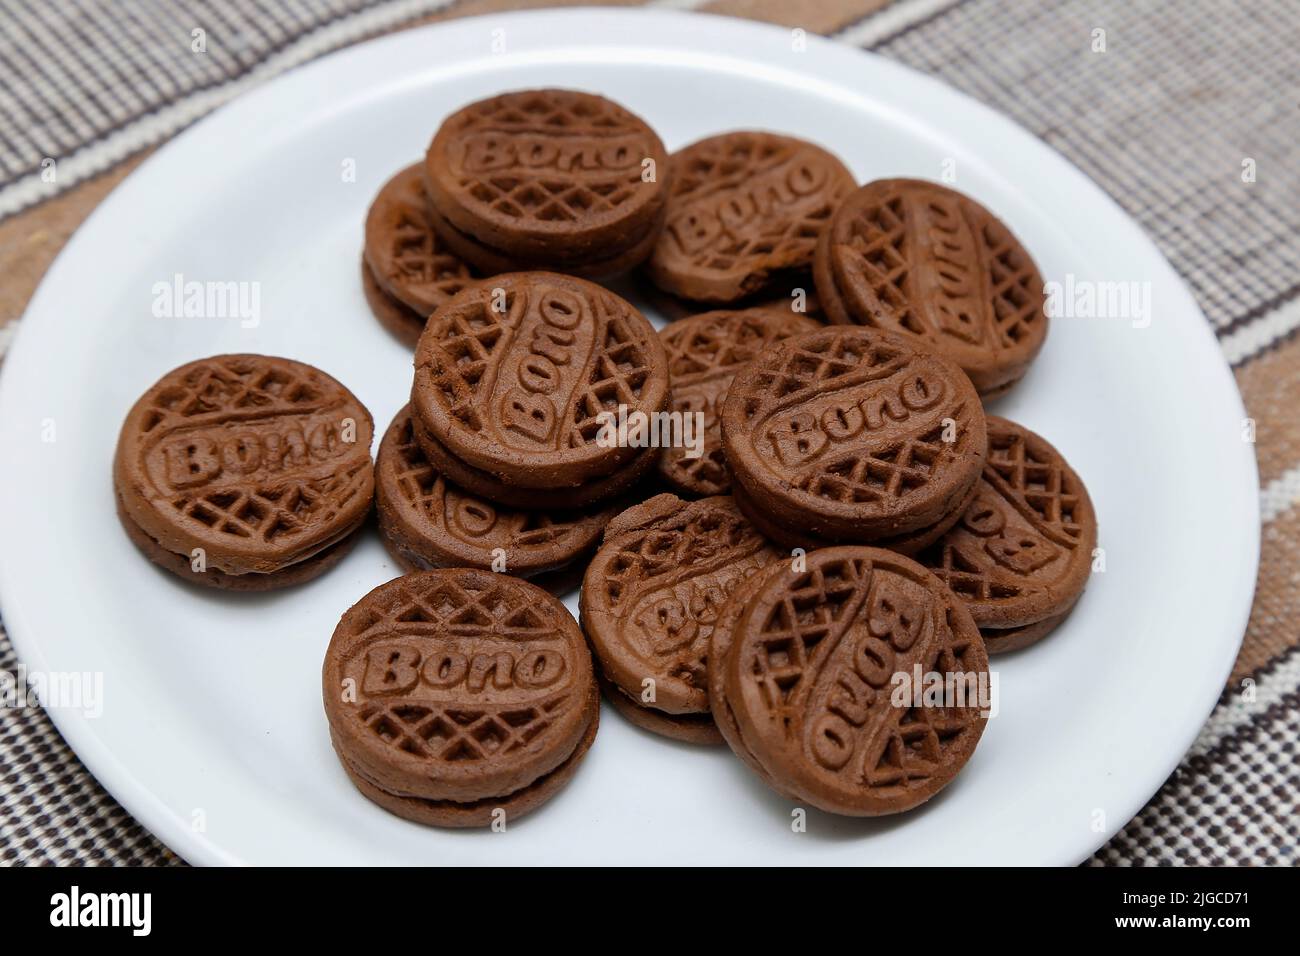 Minas Gerais, Brazil - July 09, 2022: serving with various chocolate filled cookies ready to serve on the table Stock Photo